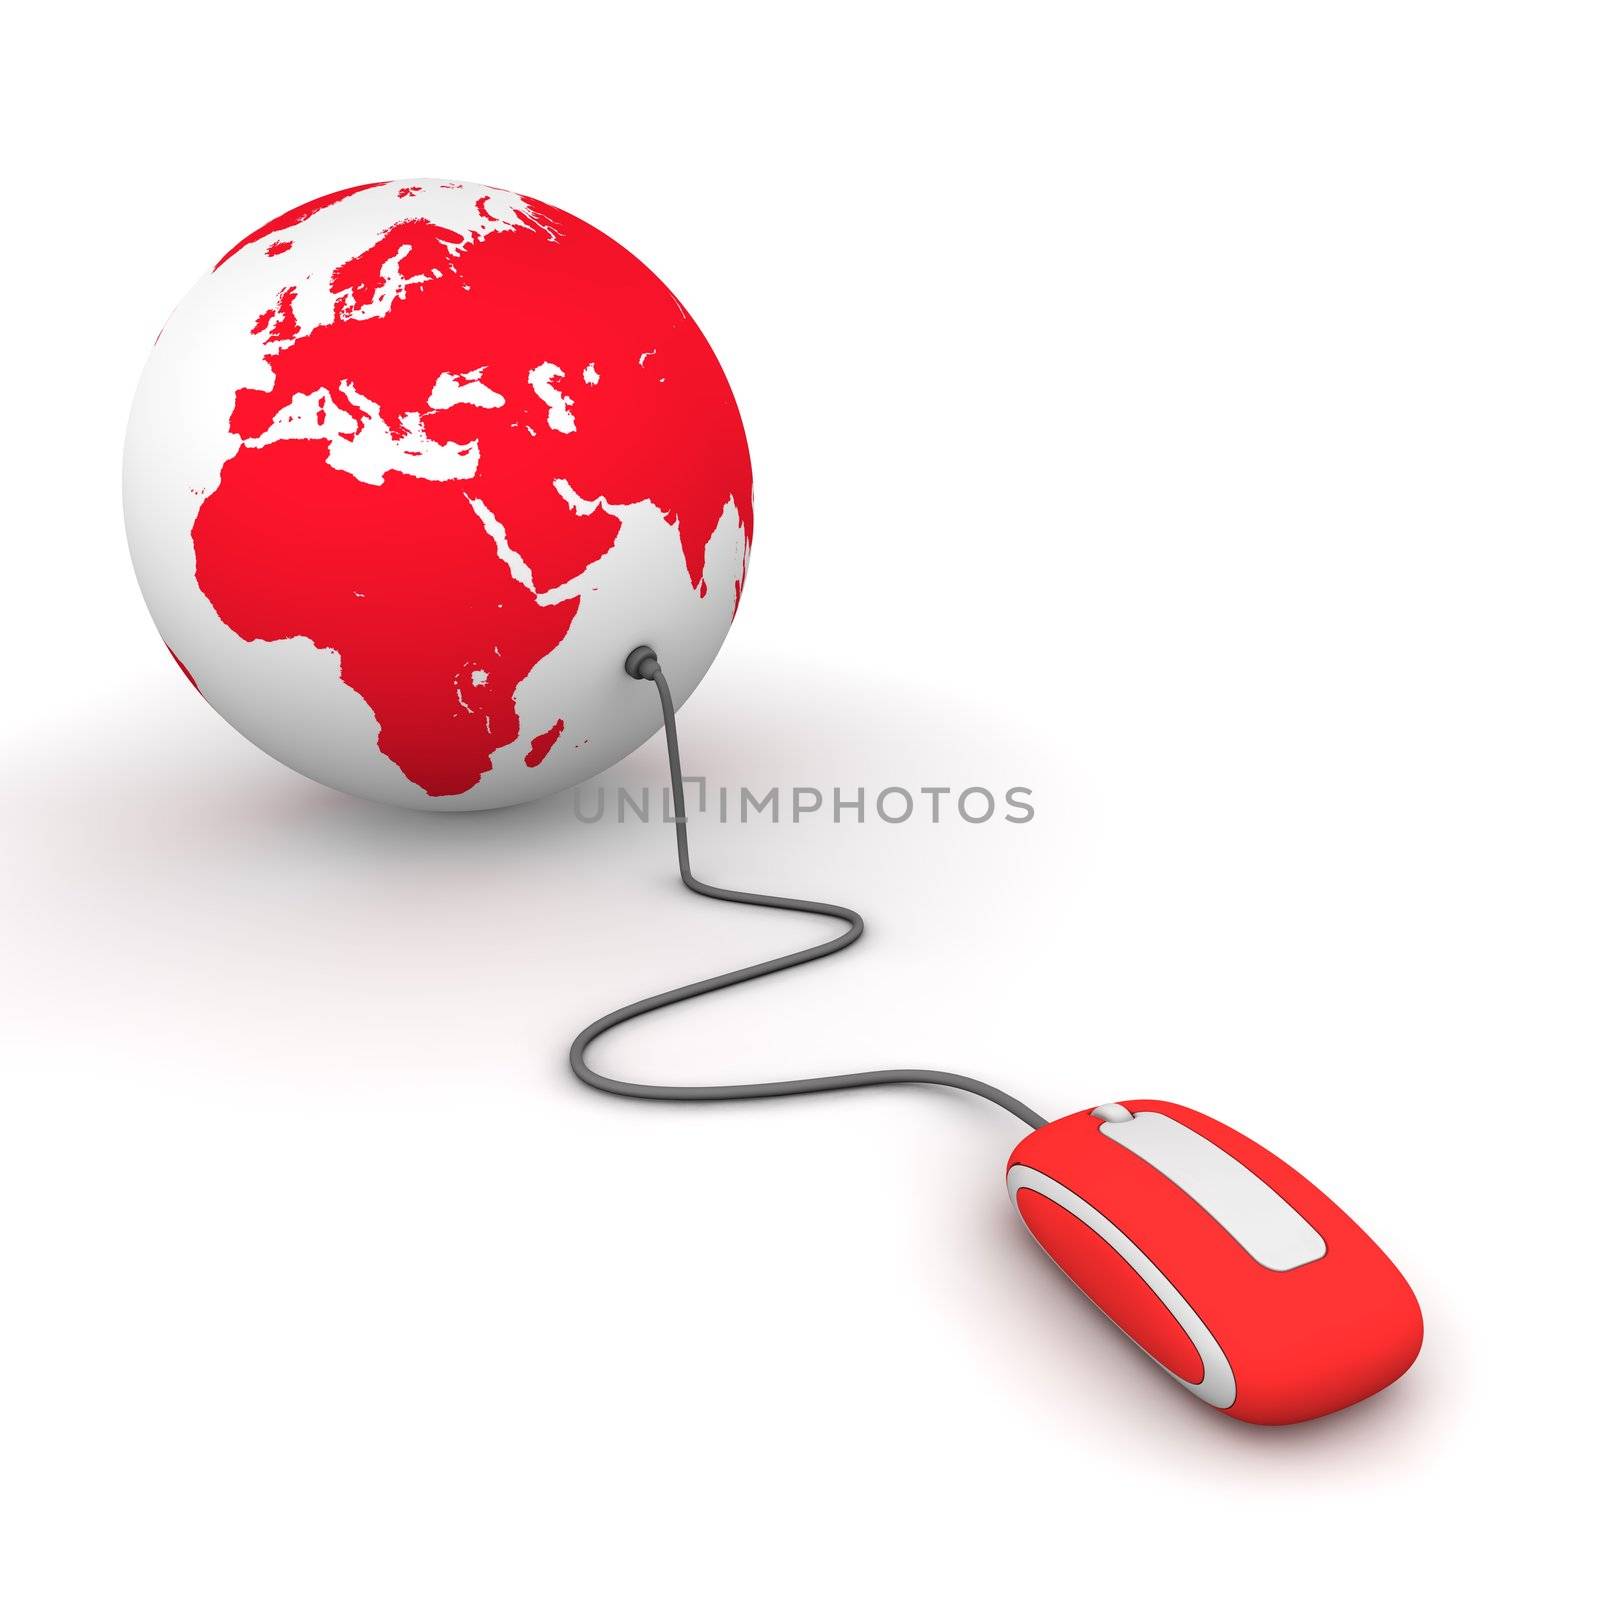 modern red computer mouse connected to a red globe